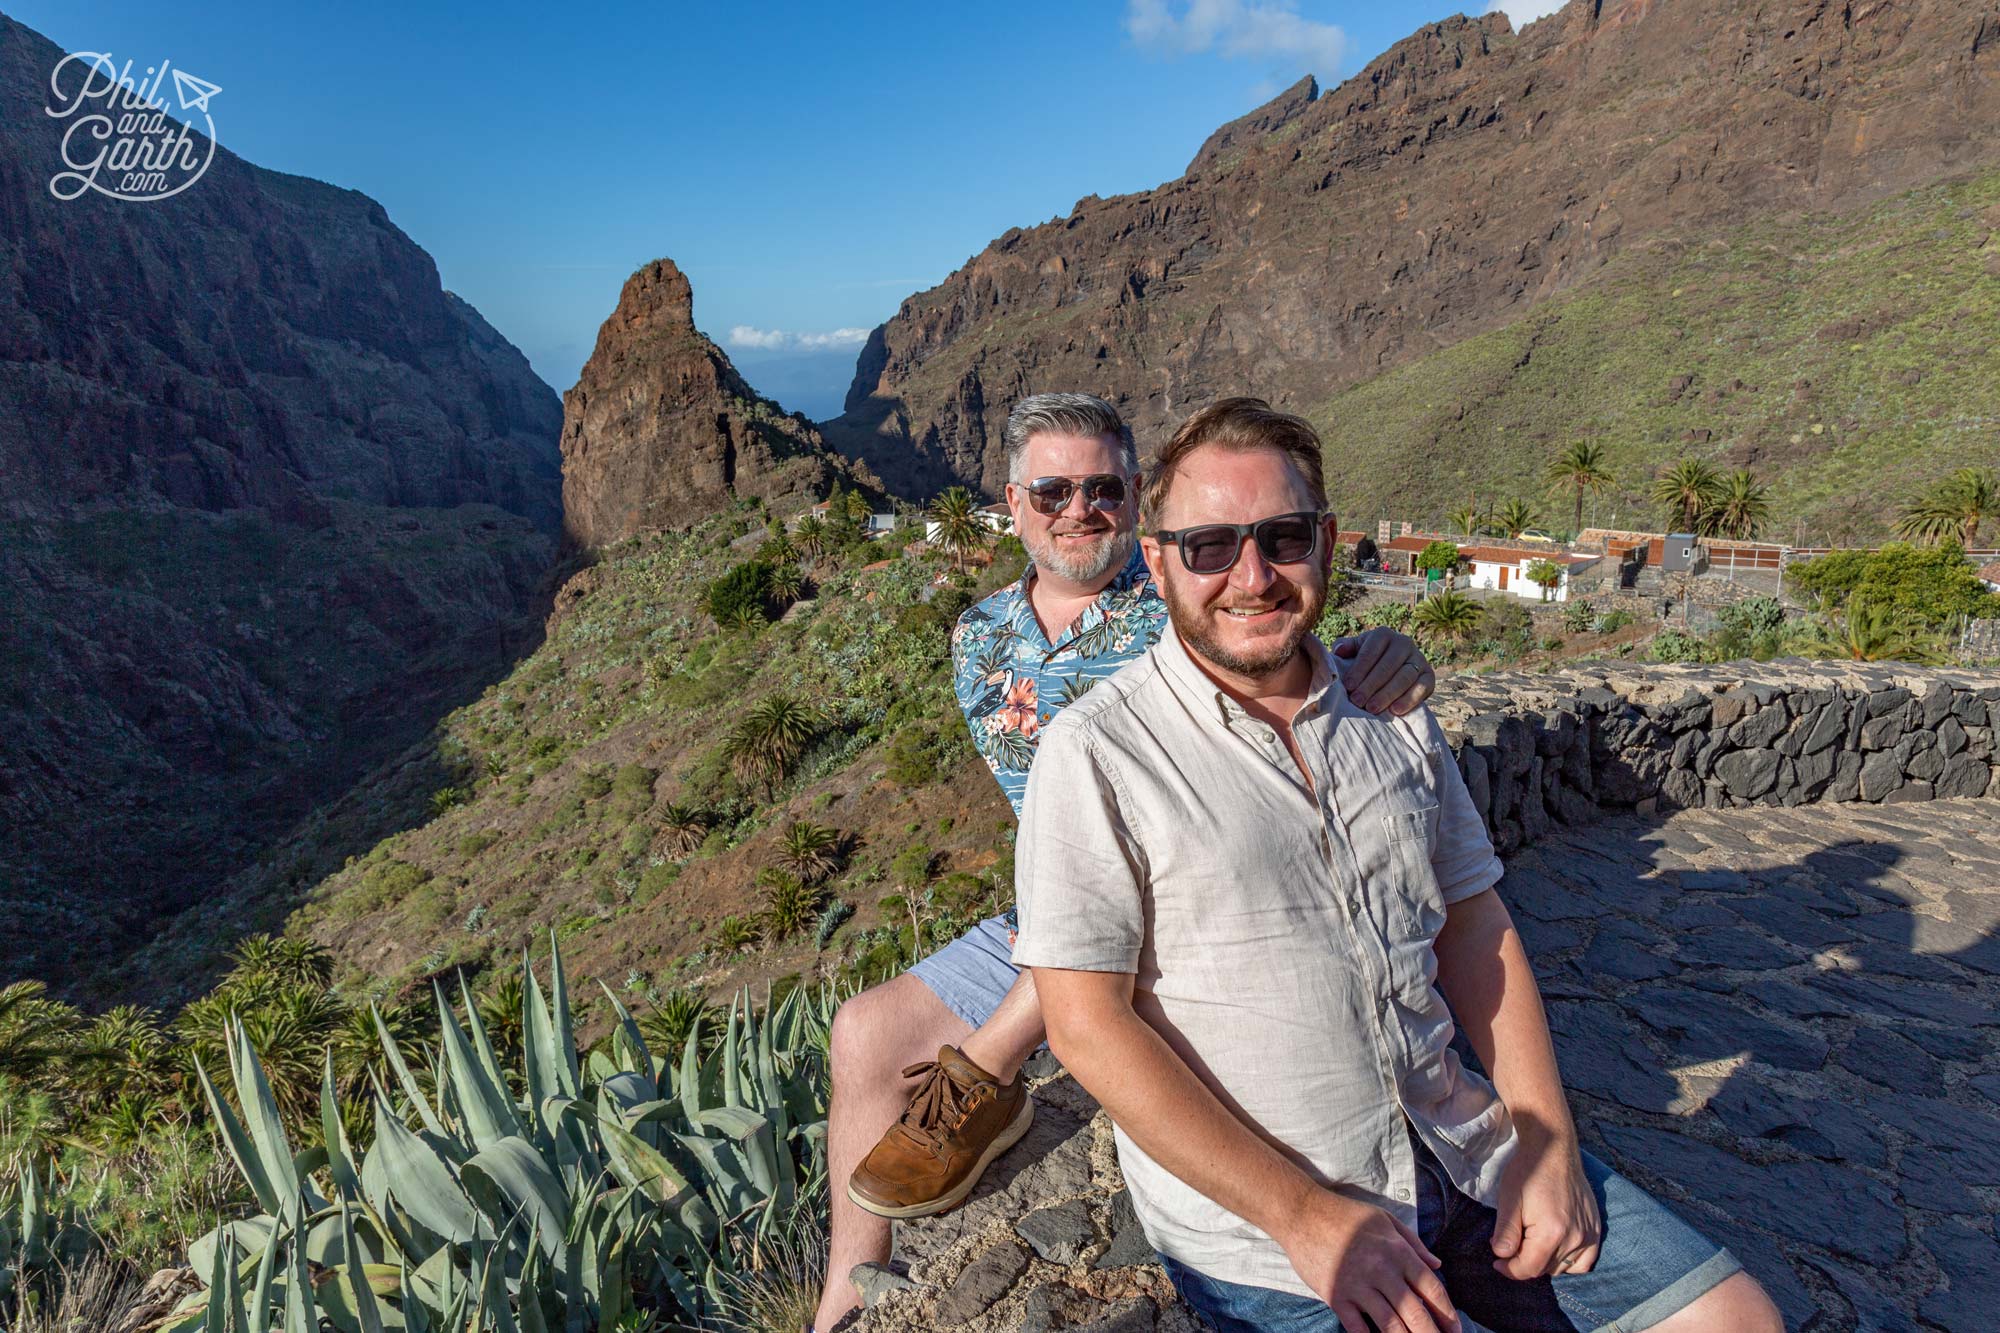 Phil and Garth's top 5 Tenerife travel tips